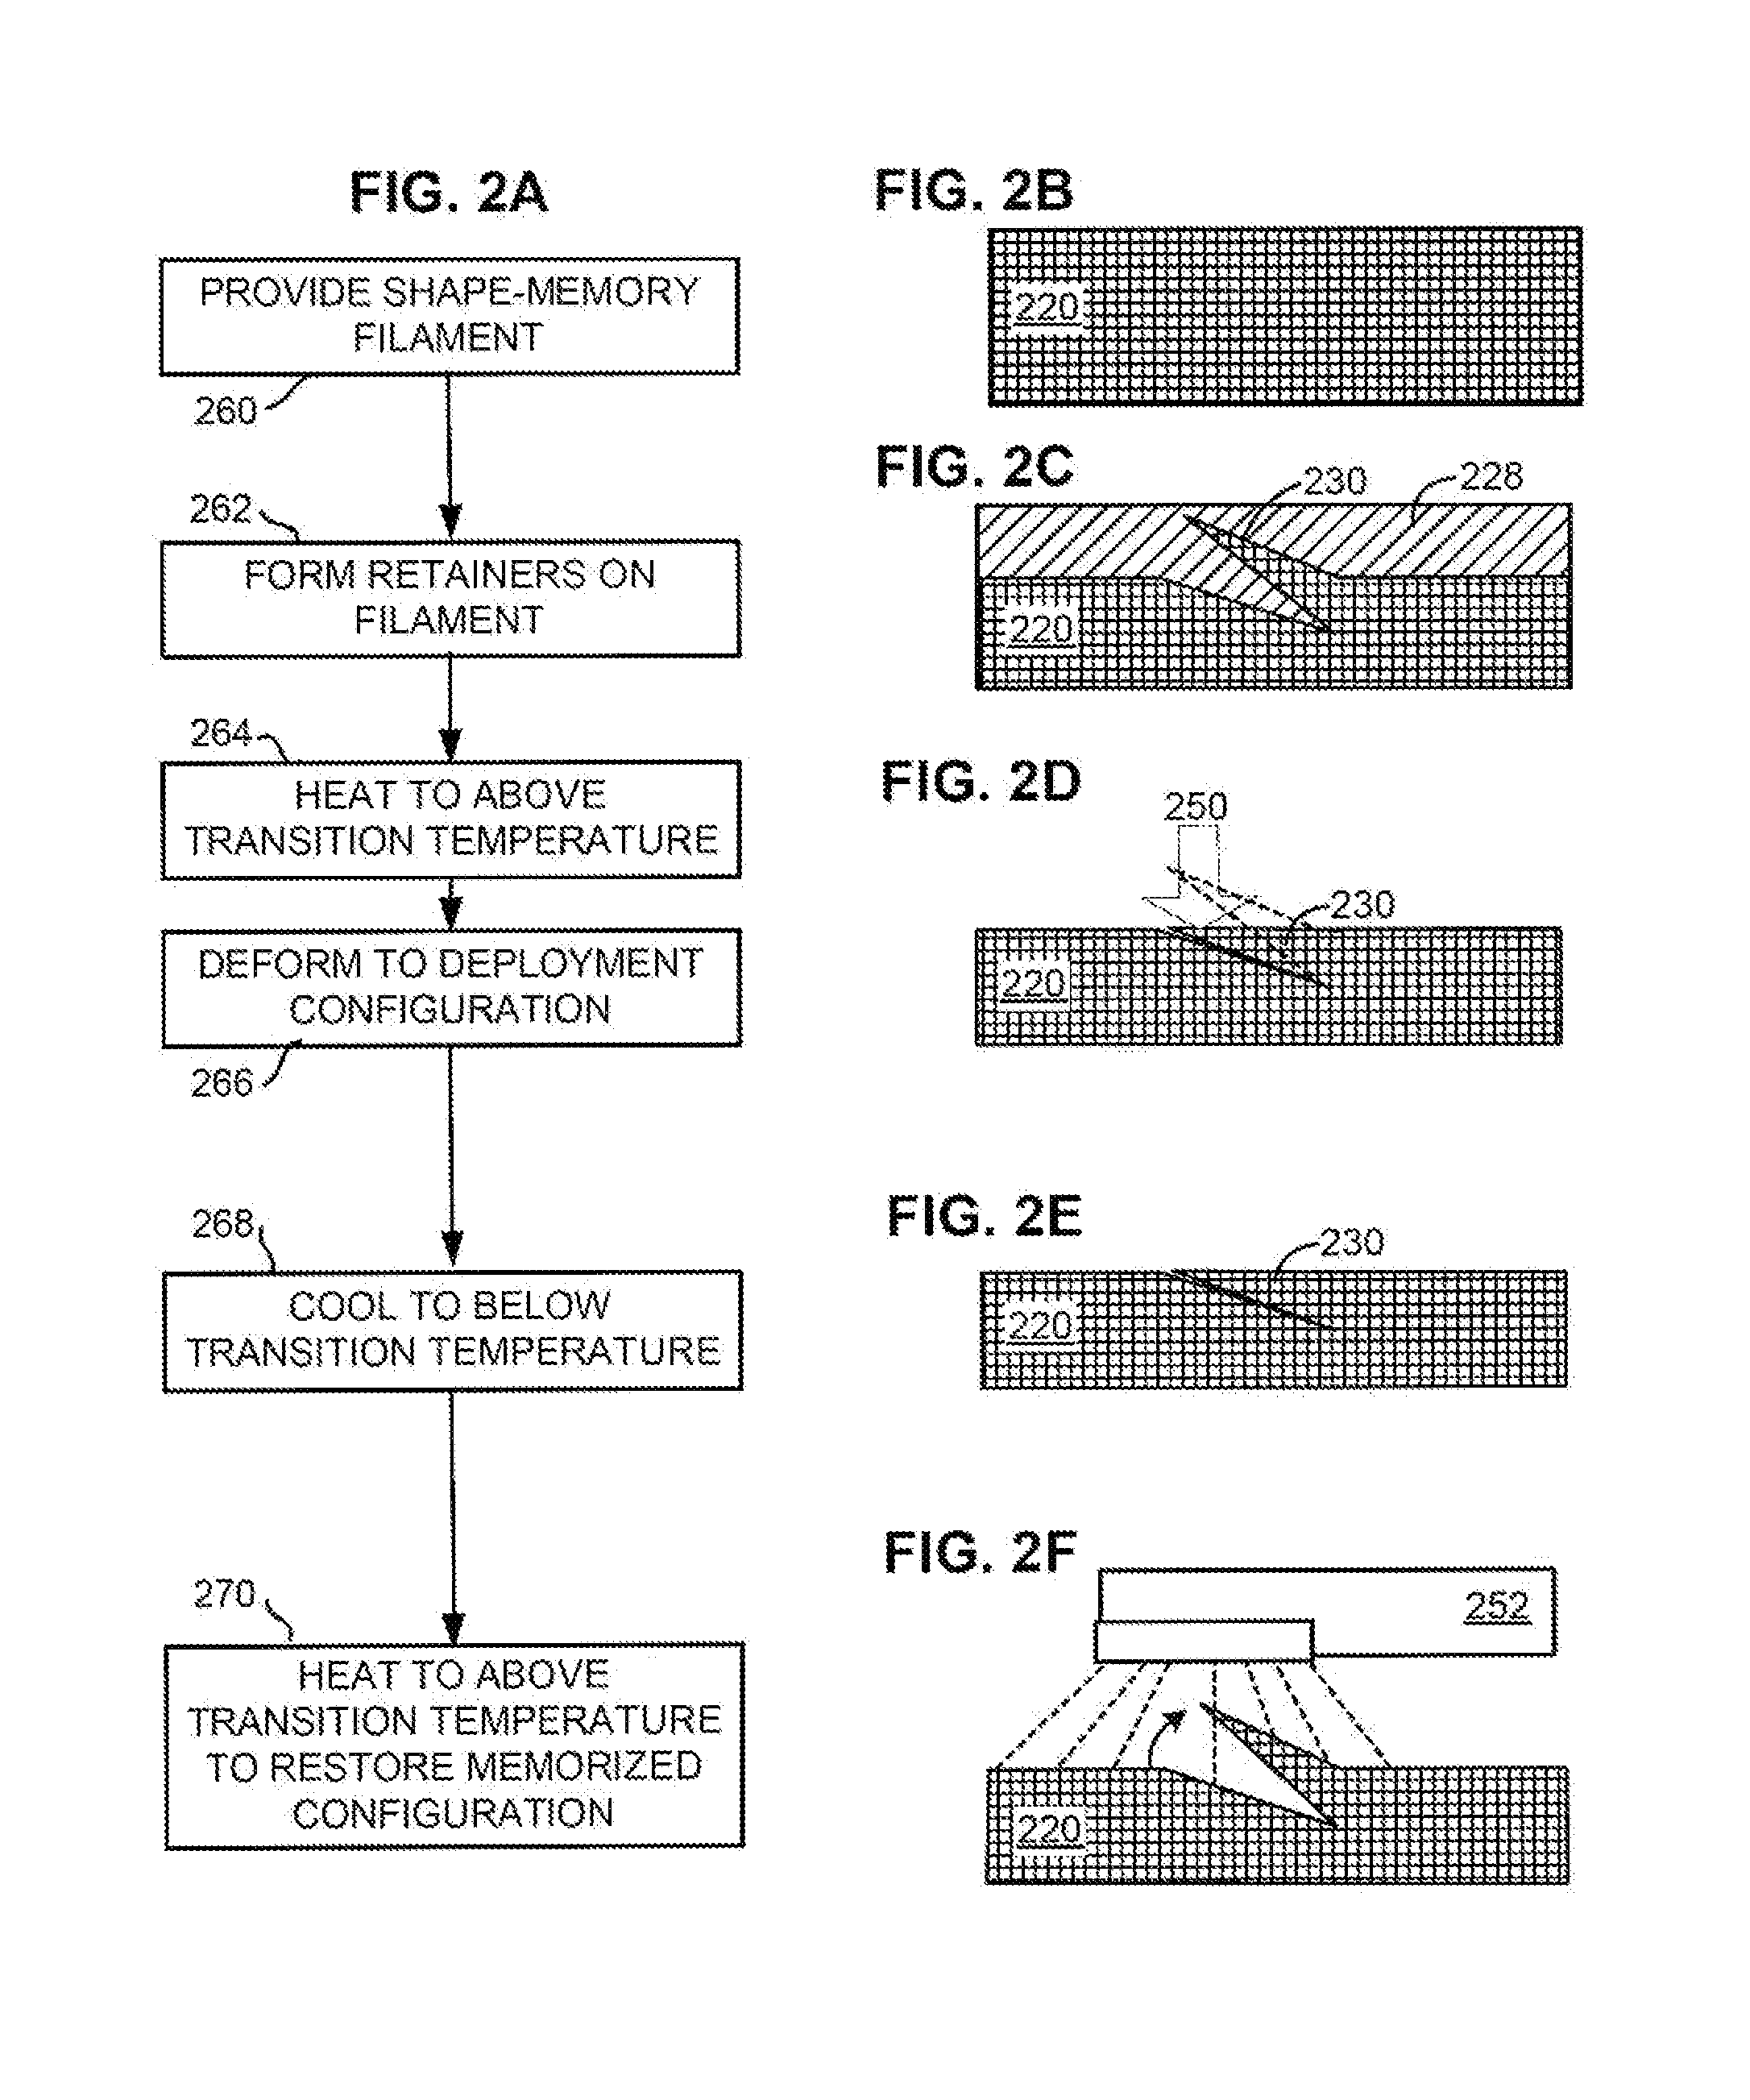 Shape-memory self-retaining sutures, methods of manufacture, and methods of use